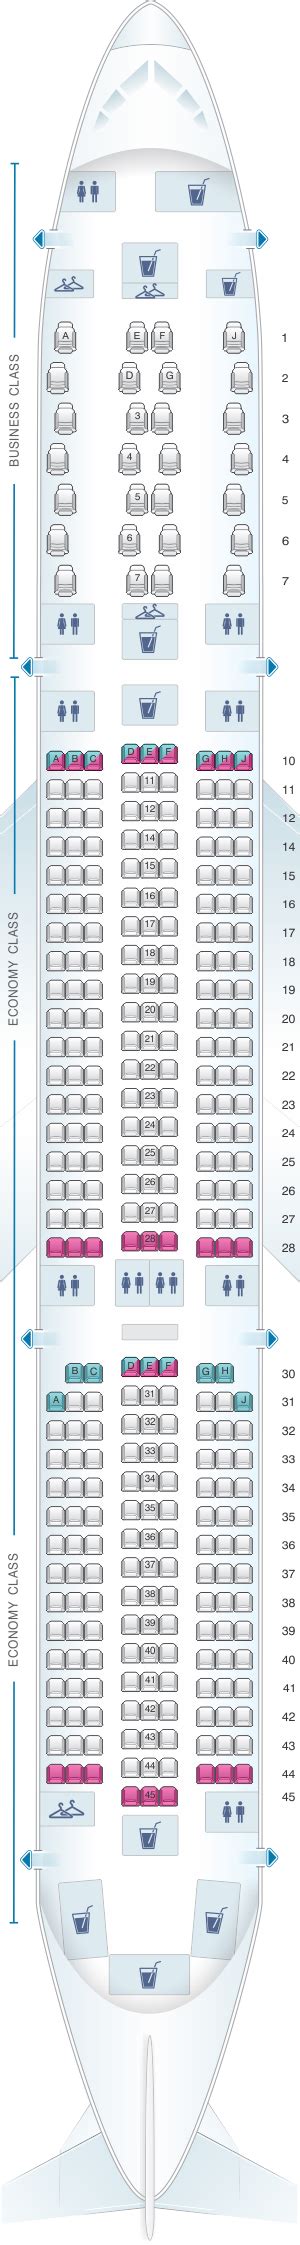 Seat Map Finnair Airbus A350 900 Config2 Seatmaestro Images And